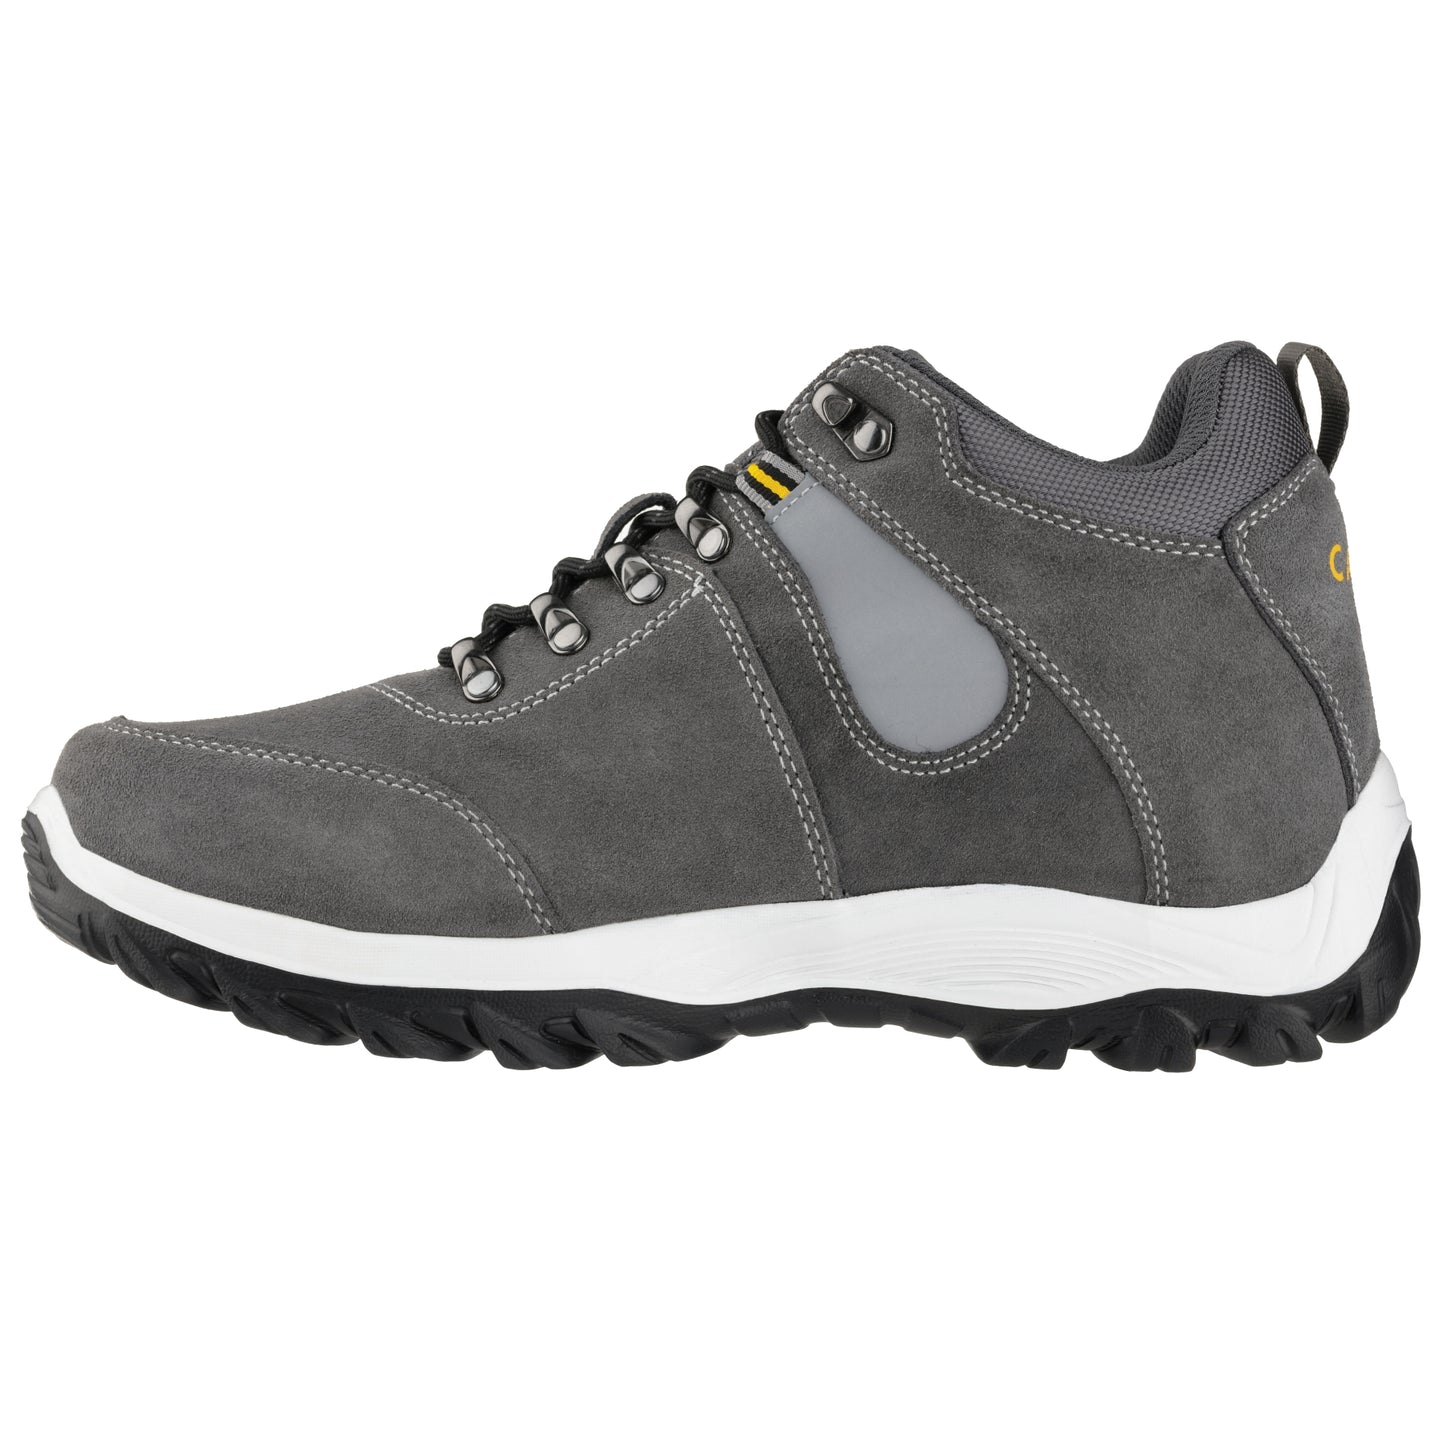 Elevator shoes height increase CALTO - S5055 - 3.2 Inches Taller (Grey) - Sneakers